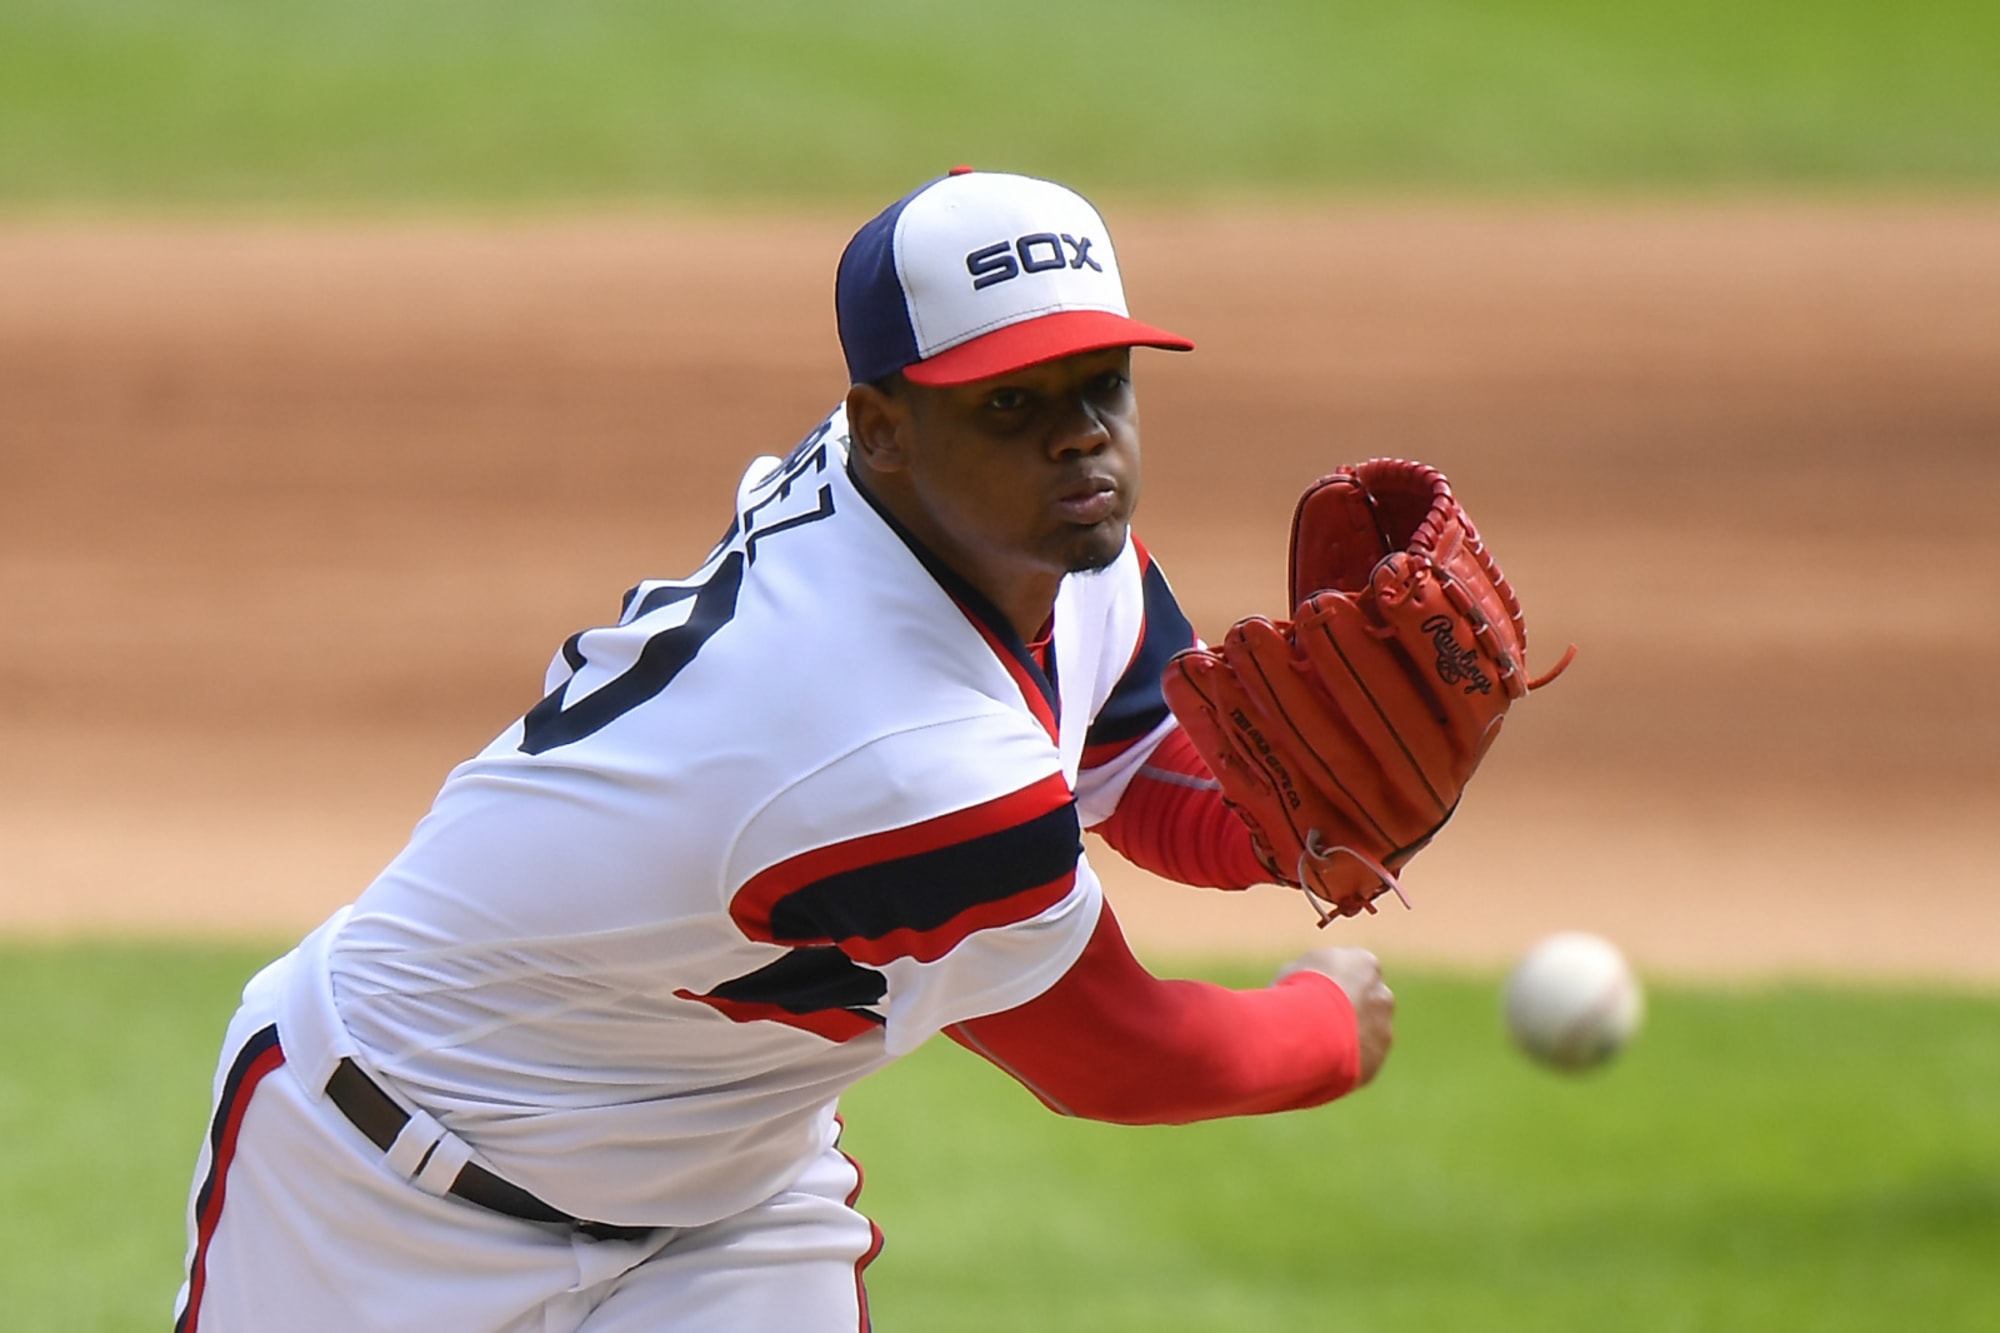 Chicago White Sox The ace of the future emerges